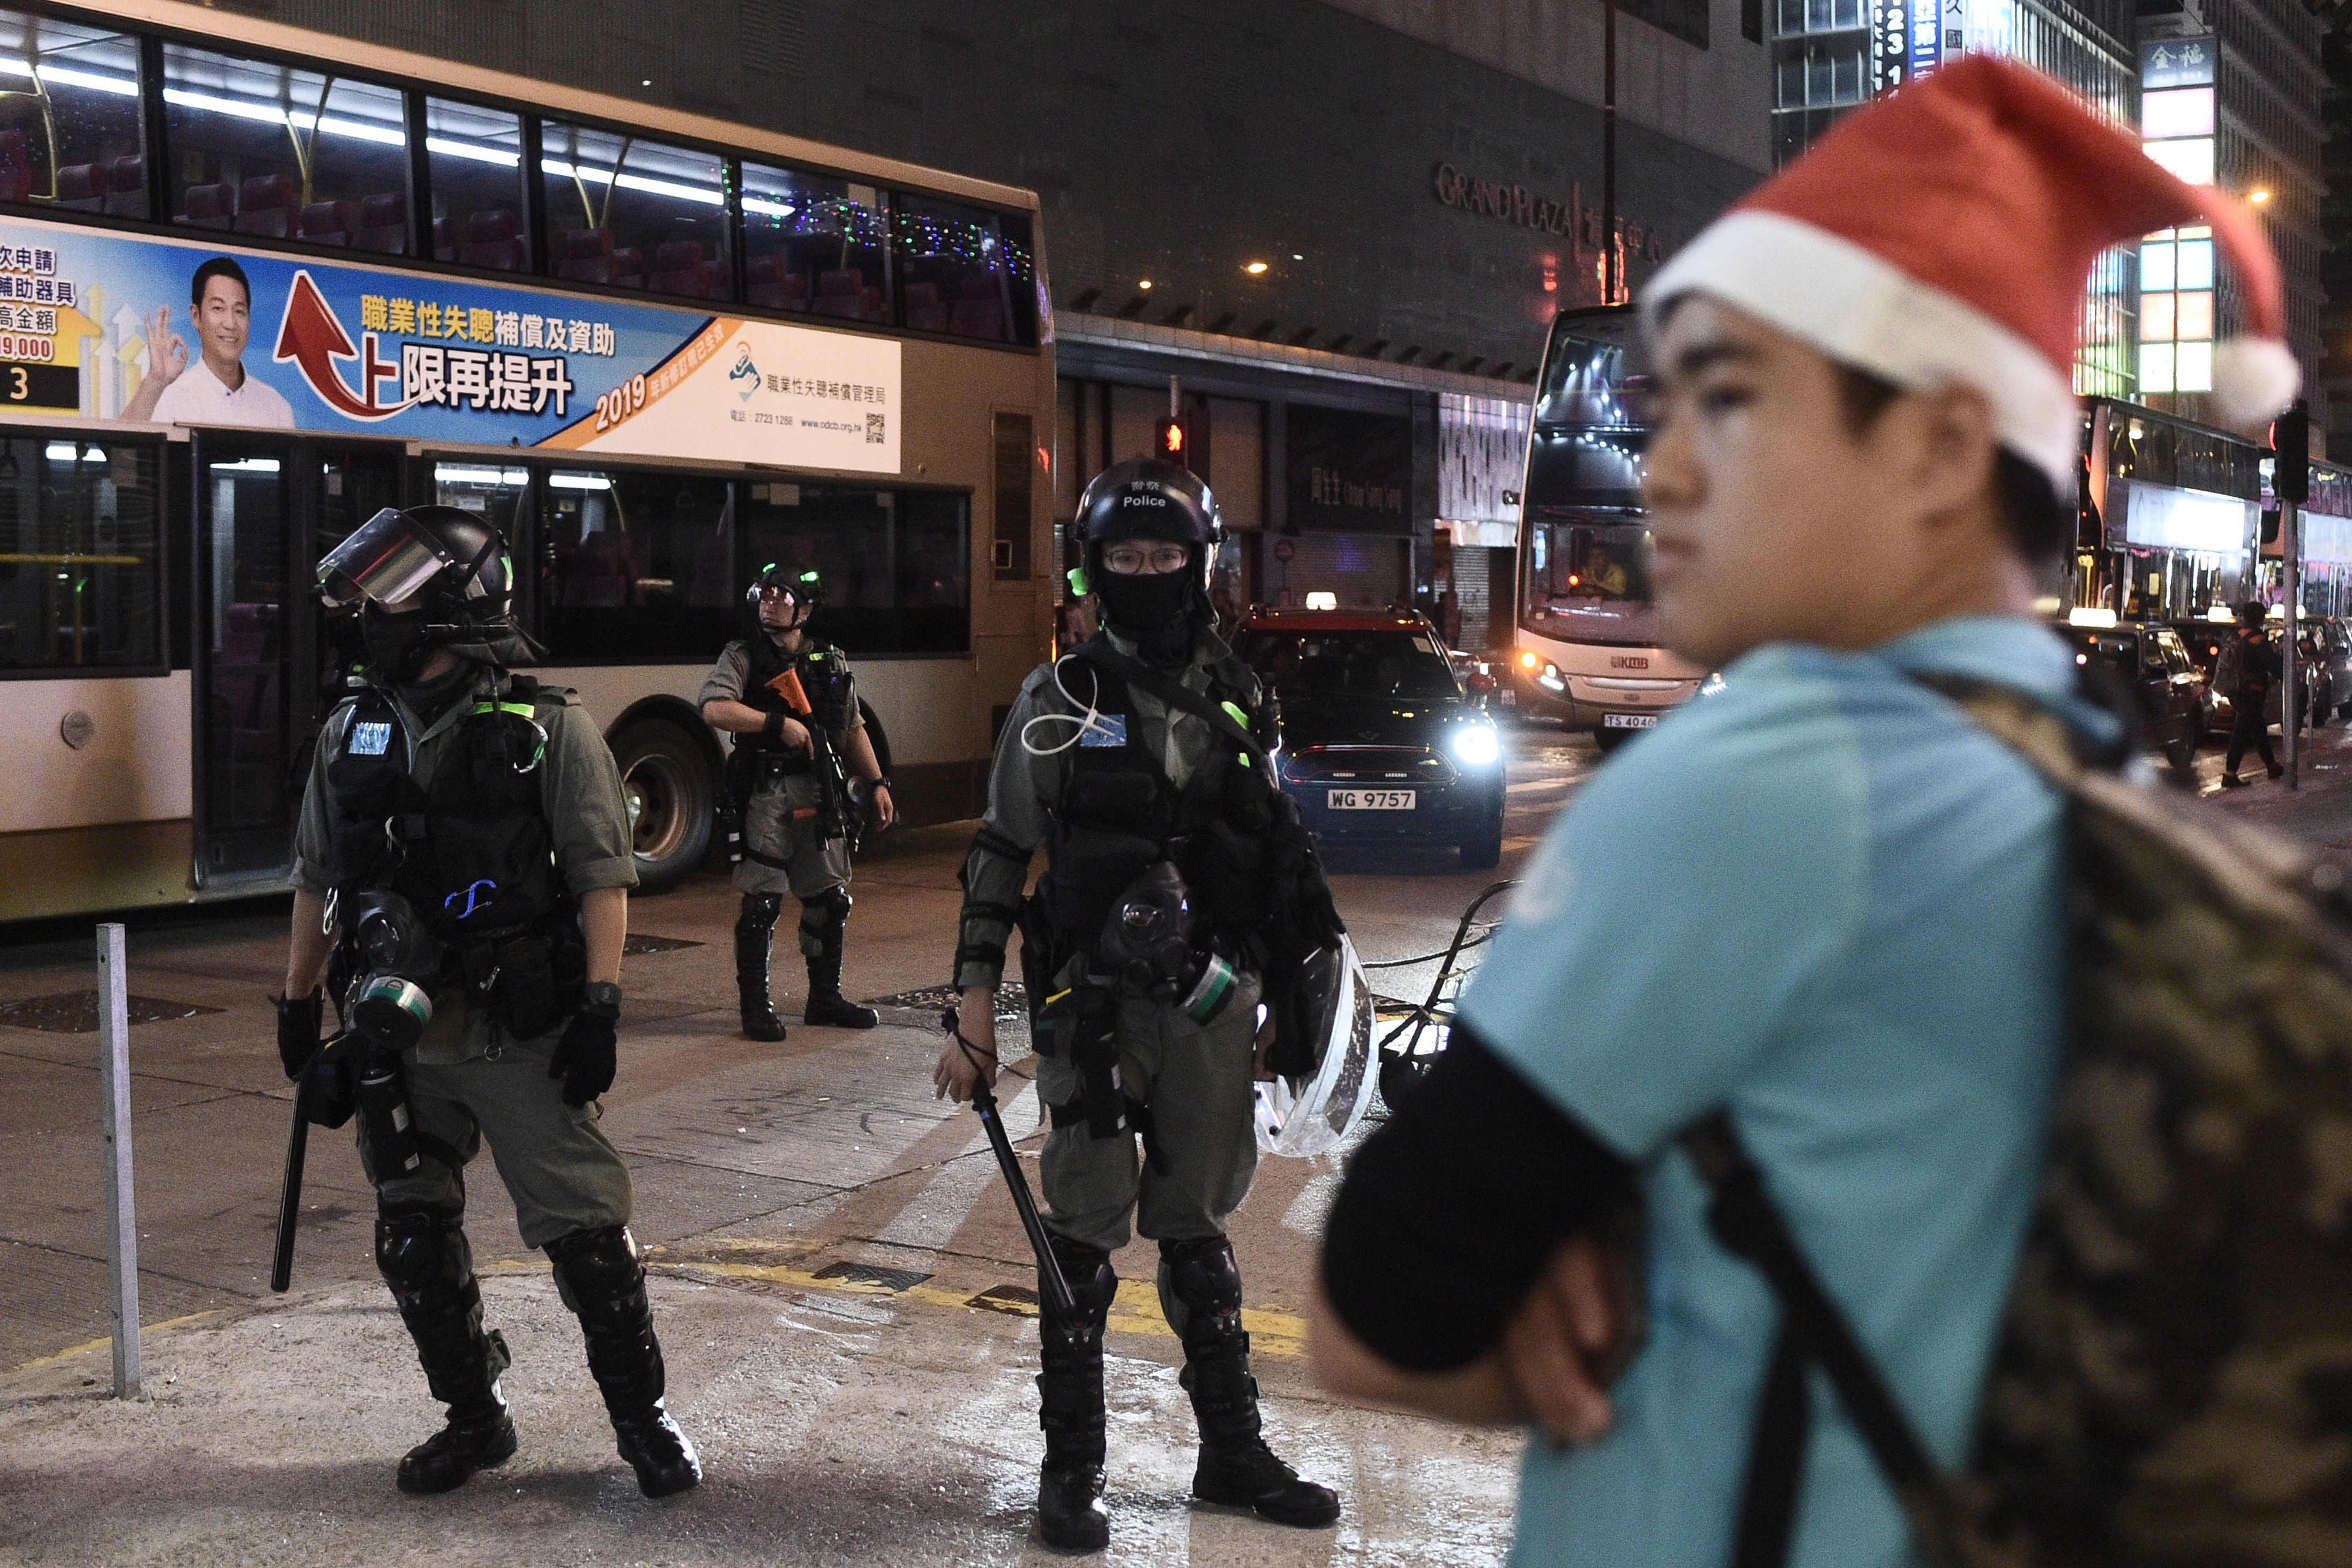 A man with a Santa hat stands in front of riot police during a protest in Mong Kok district in Hong Kong on December 25